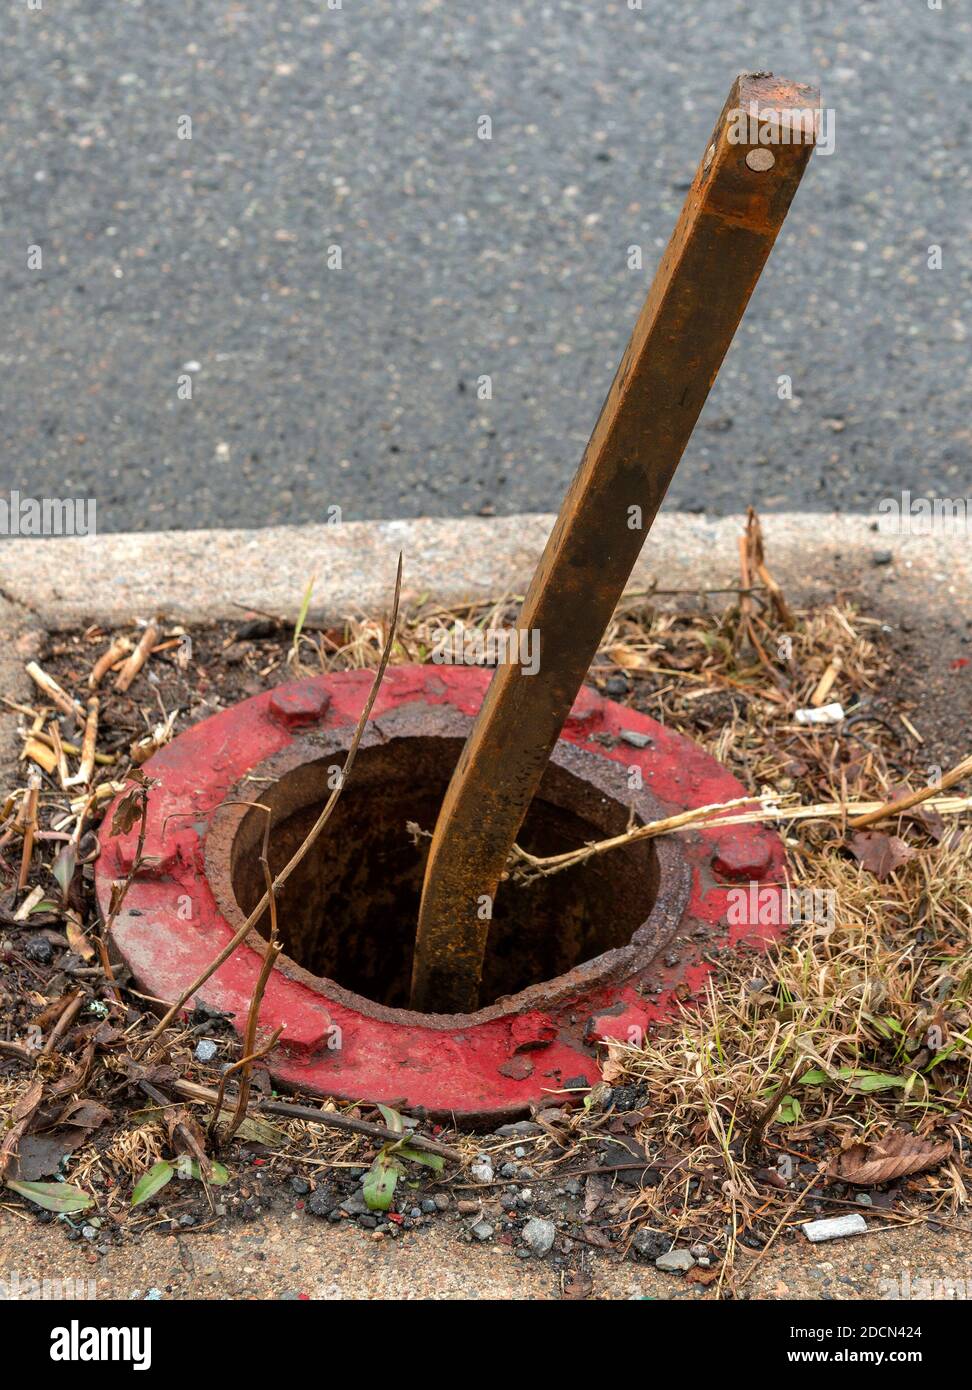 A broken fire hydrant. The actual hydrant is missing, the supporting base around the hole, and valve stem are still present. The valve stem is bent. F Stock Photo